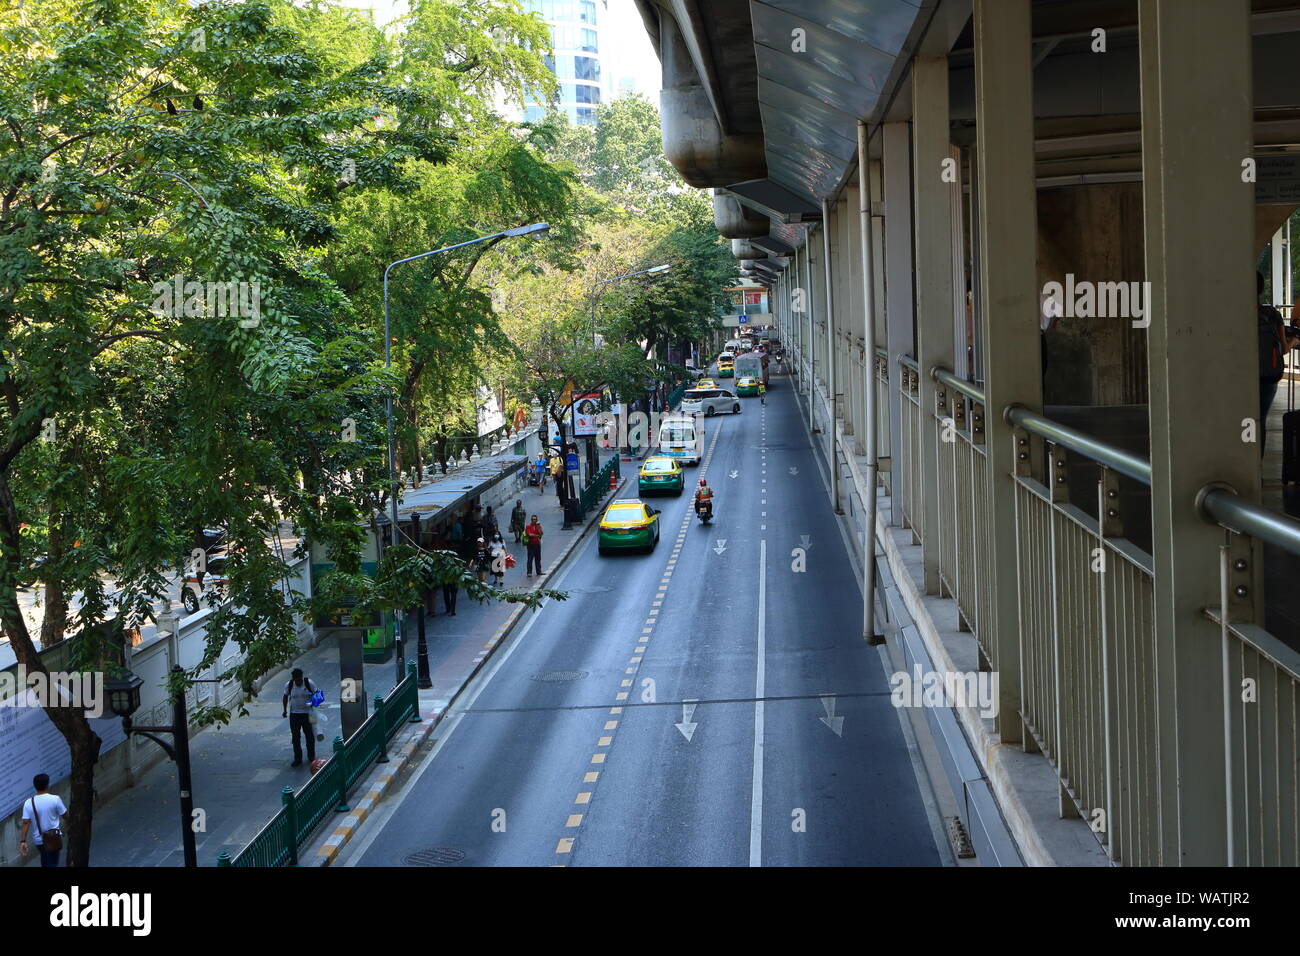 Diminishing perspective view of Rama 1 rd., in front of Pathumwanaram temple, looking from Siam square to Ratchaprasong intersection, business and sho Stock Photo